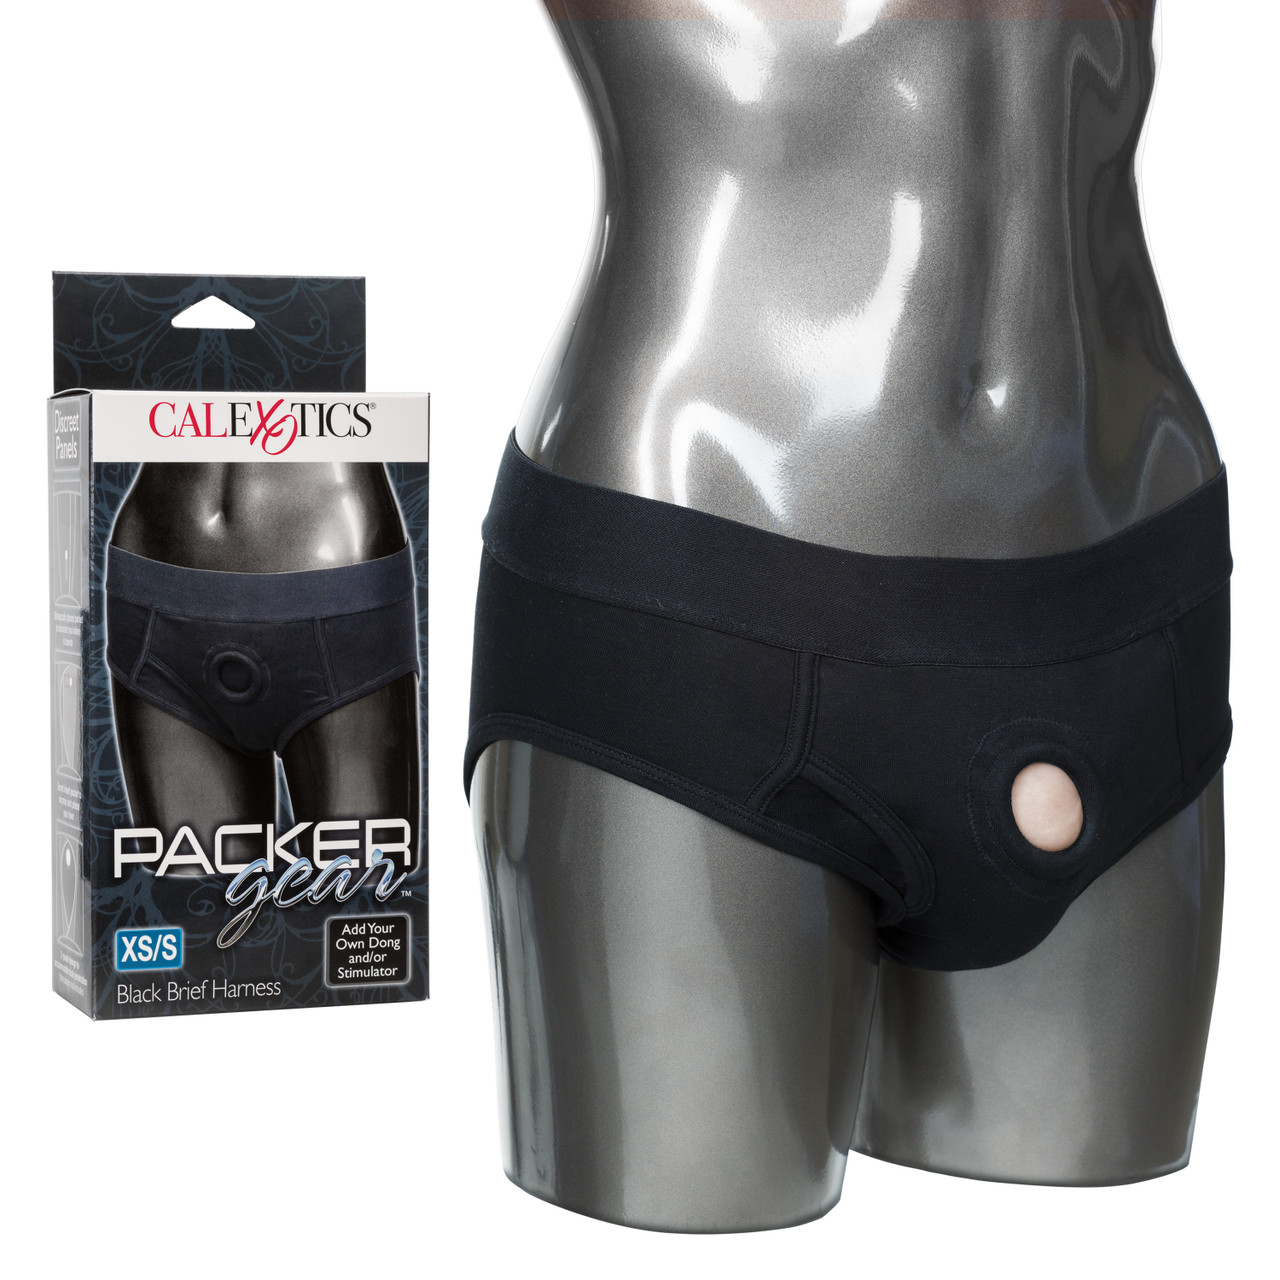 PACKER GEAR BLACK BRIEF HARNESS XS/S - Click Image to Close